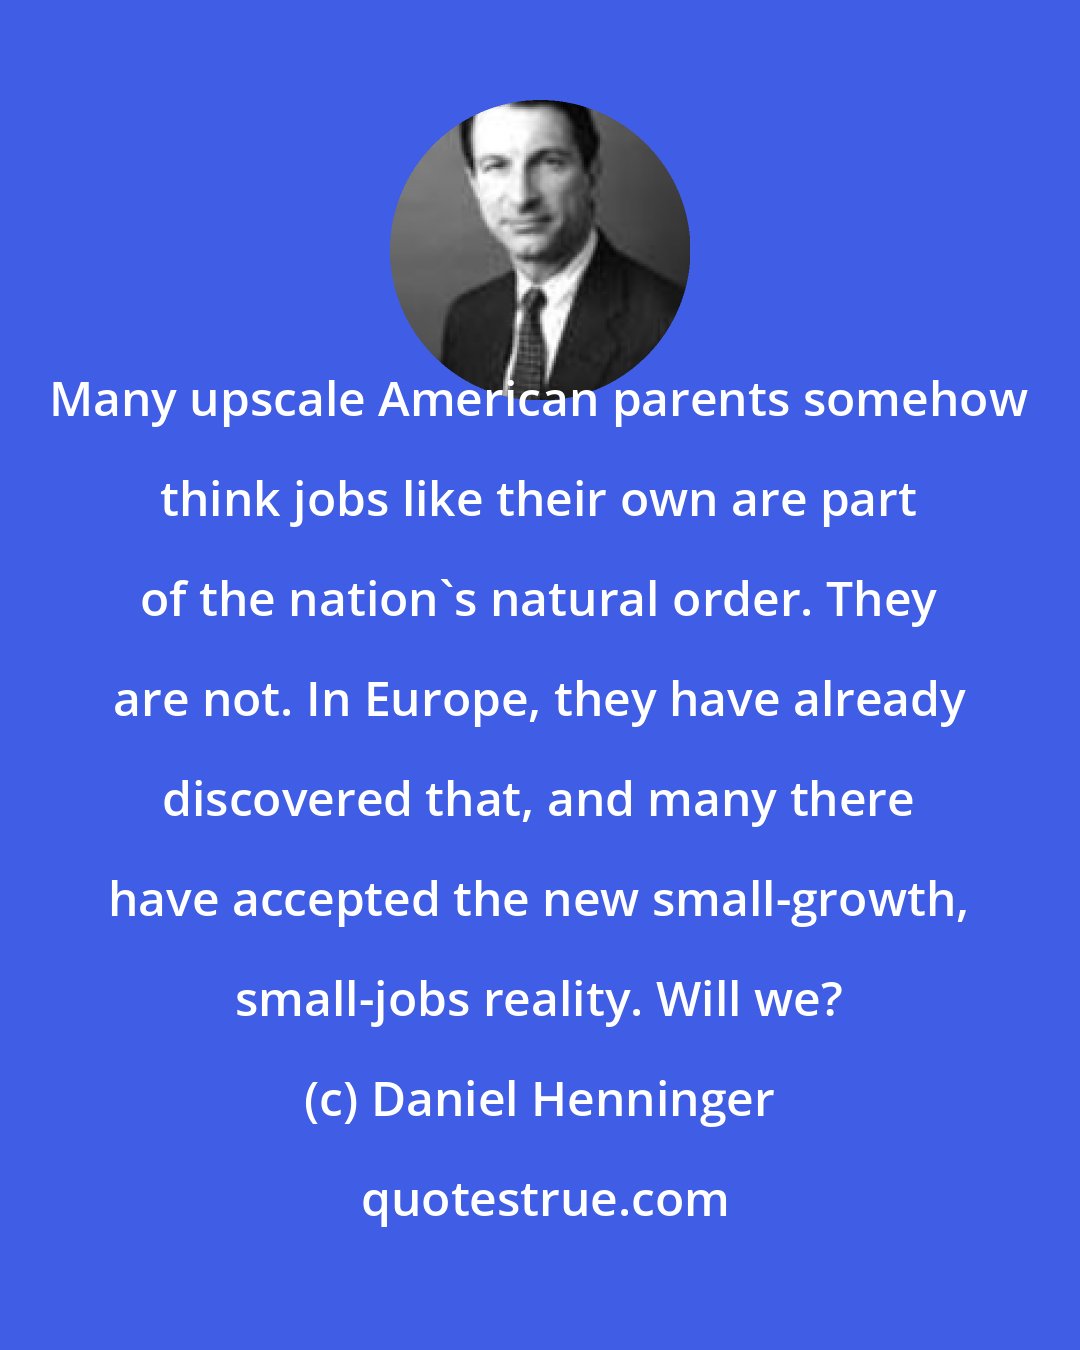 Daniel Henninger: Many upscale American parents somehow think jobs like their own are part of the nation's natural order. They are not. In Europe, they have already discovered that, and many there have accepted the new small-growth, small-jobs reality. Will we?